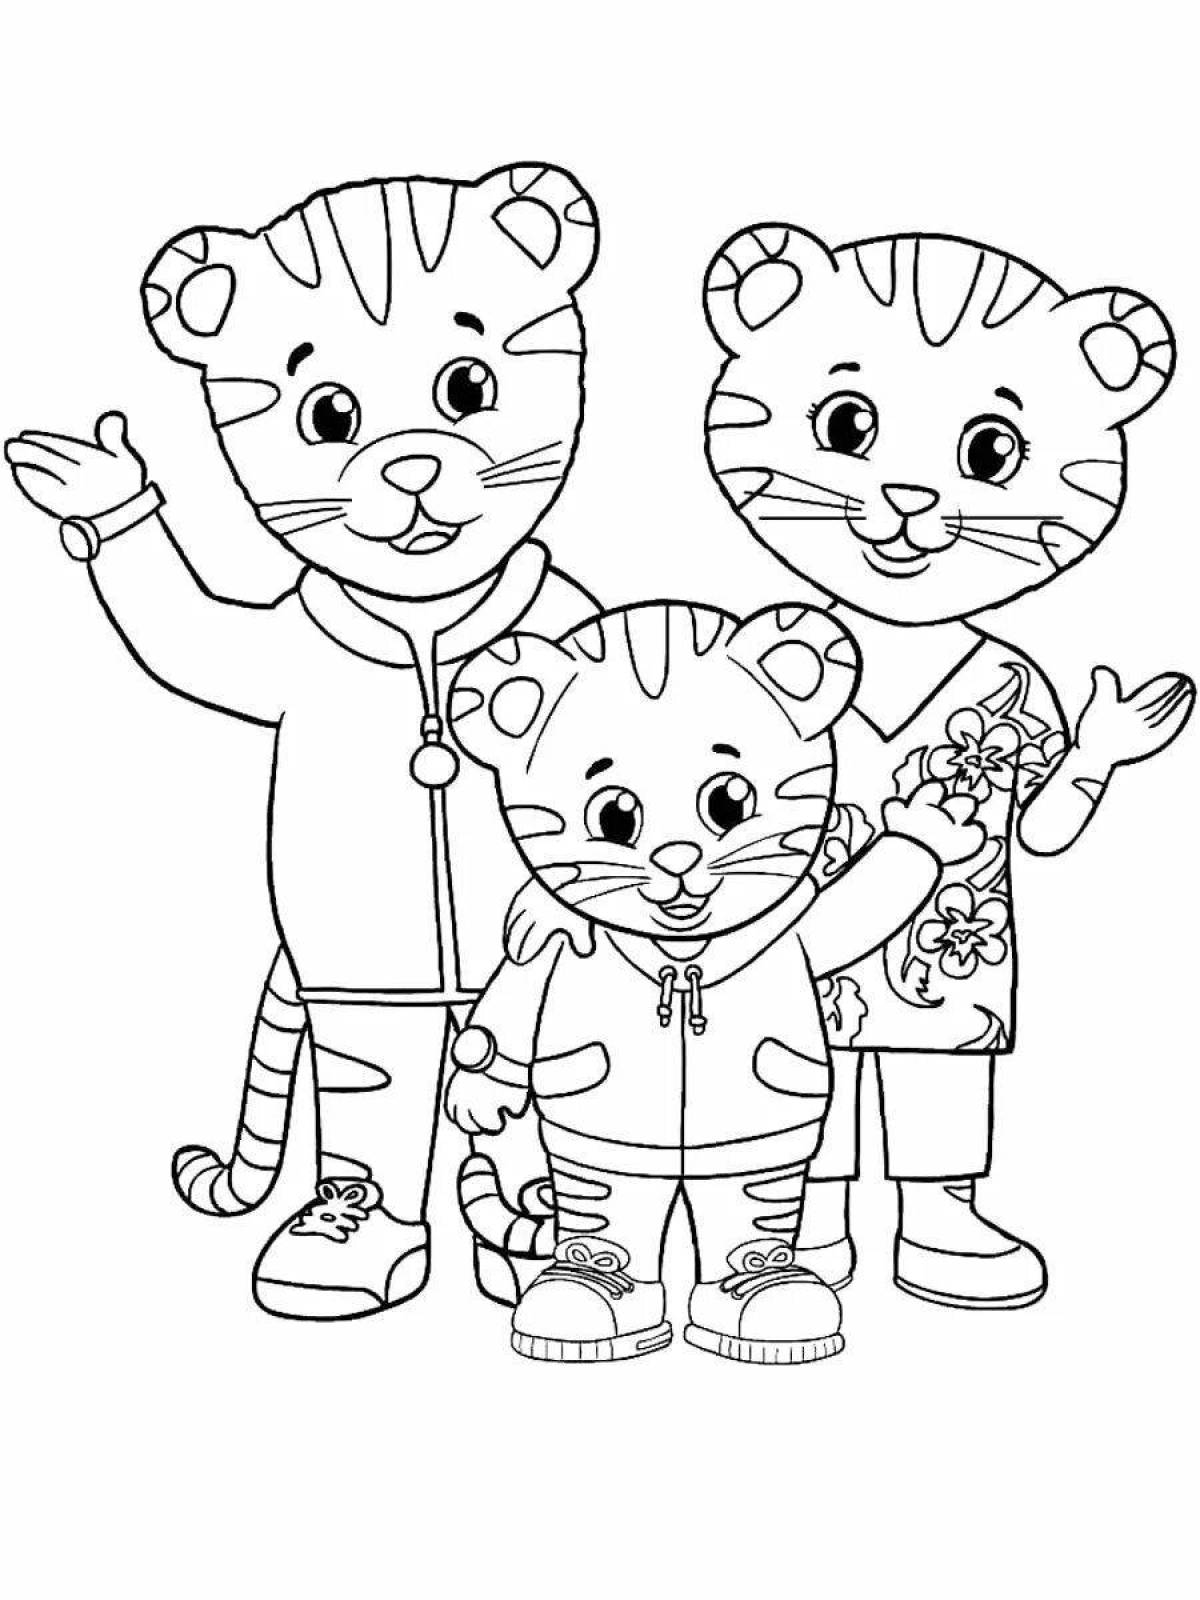 Courageous tiger coloring for girls